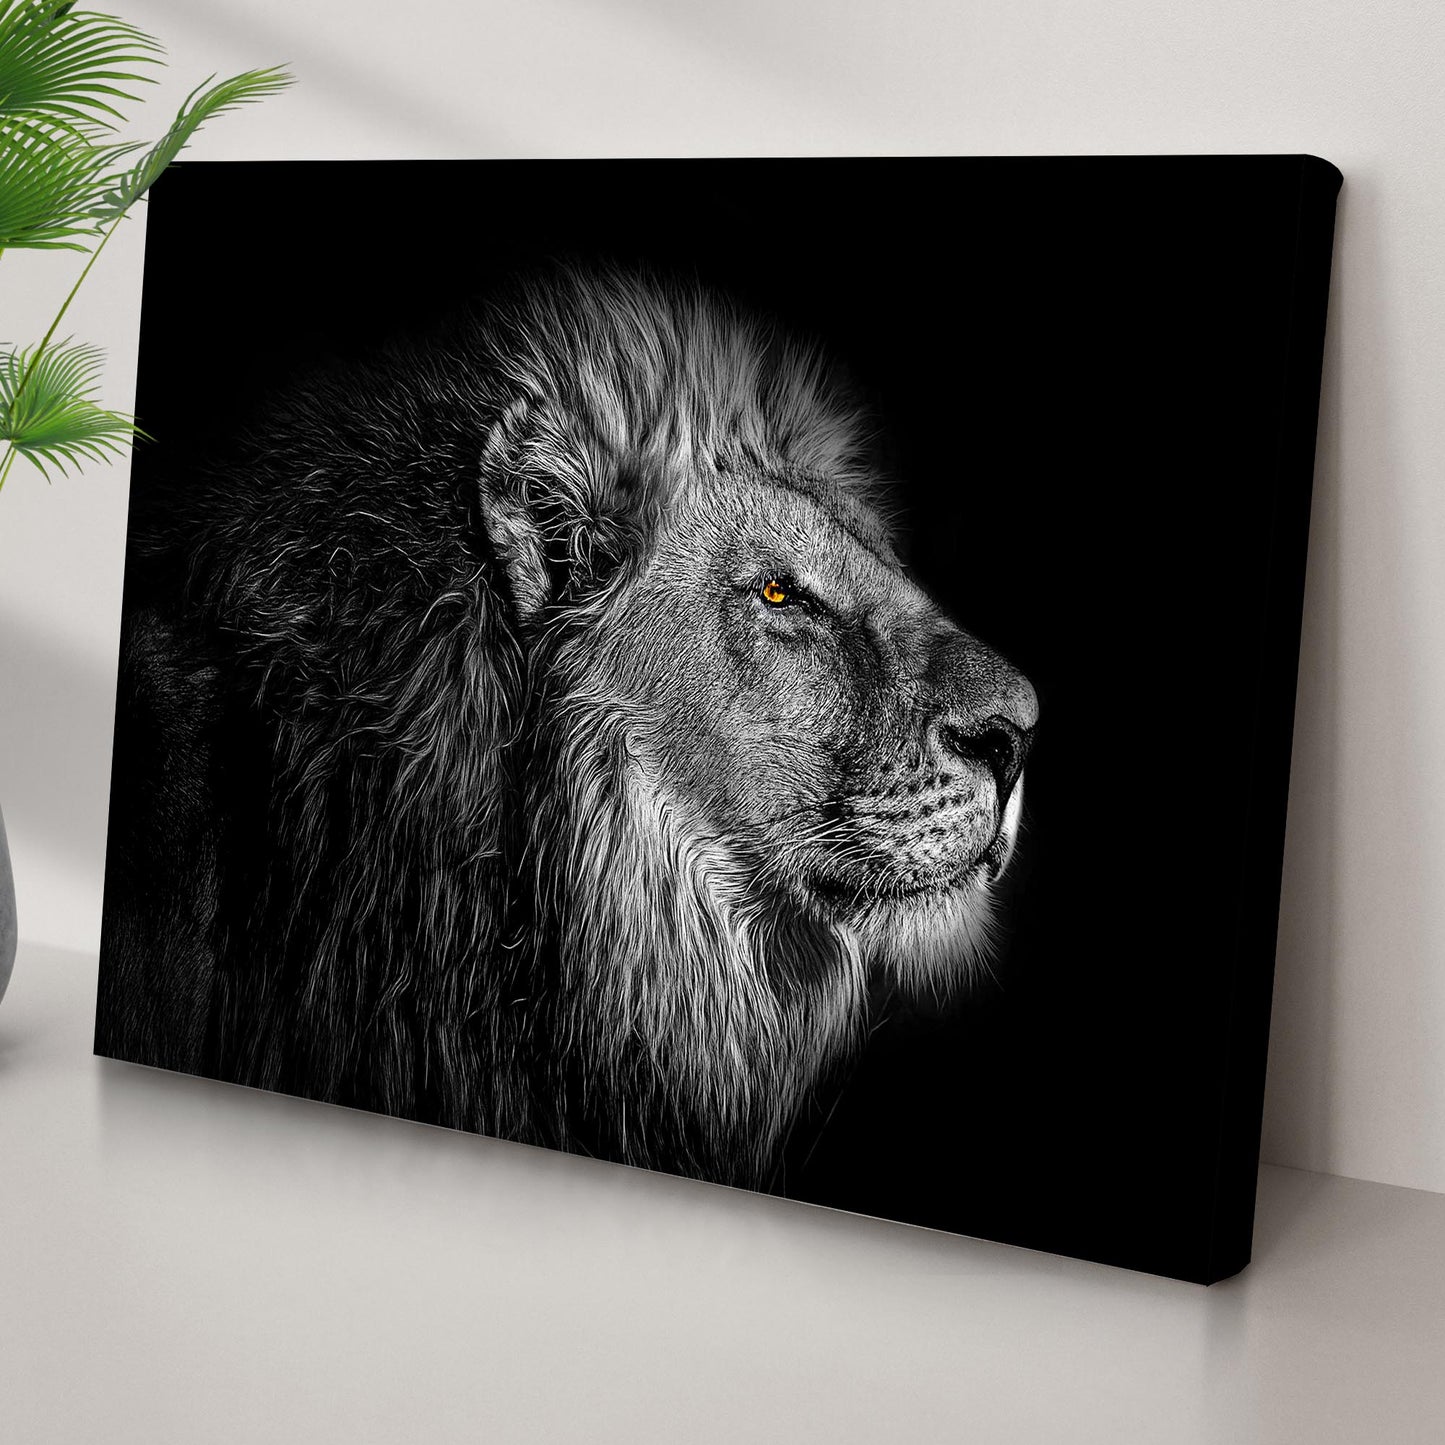 Black And White Lion Head Canvas Wall Art Style 2 - Image by Tailored Canvases